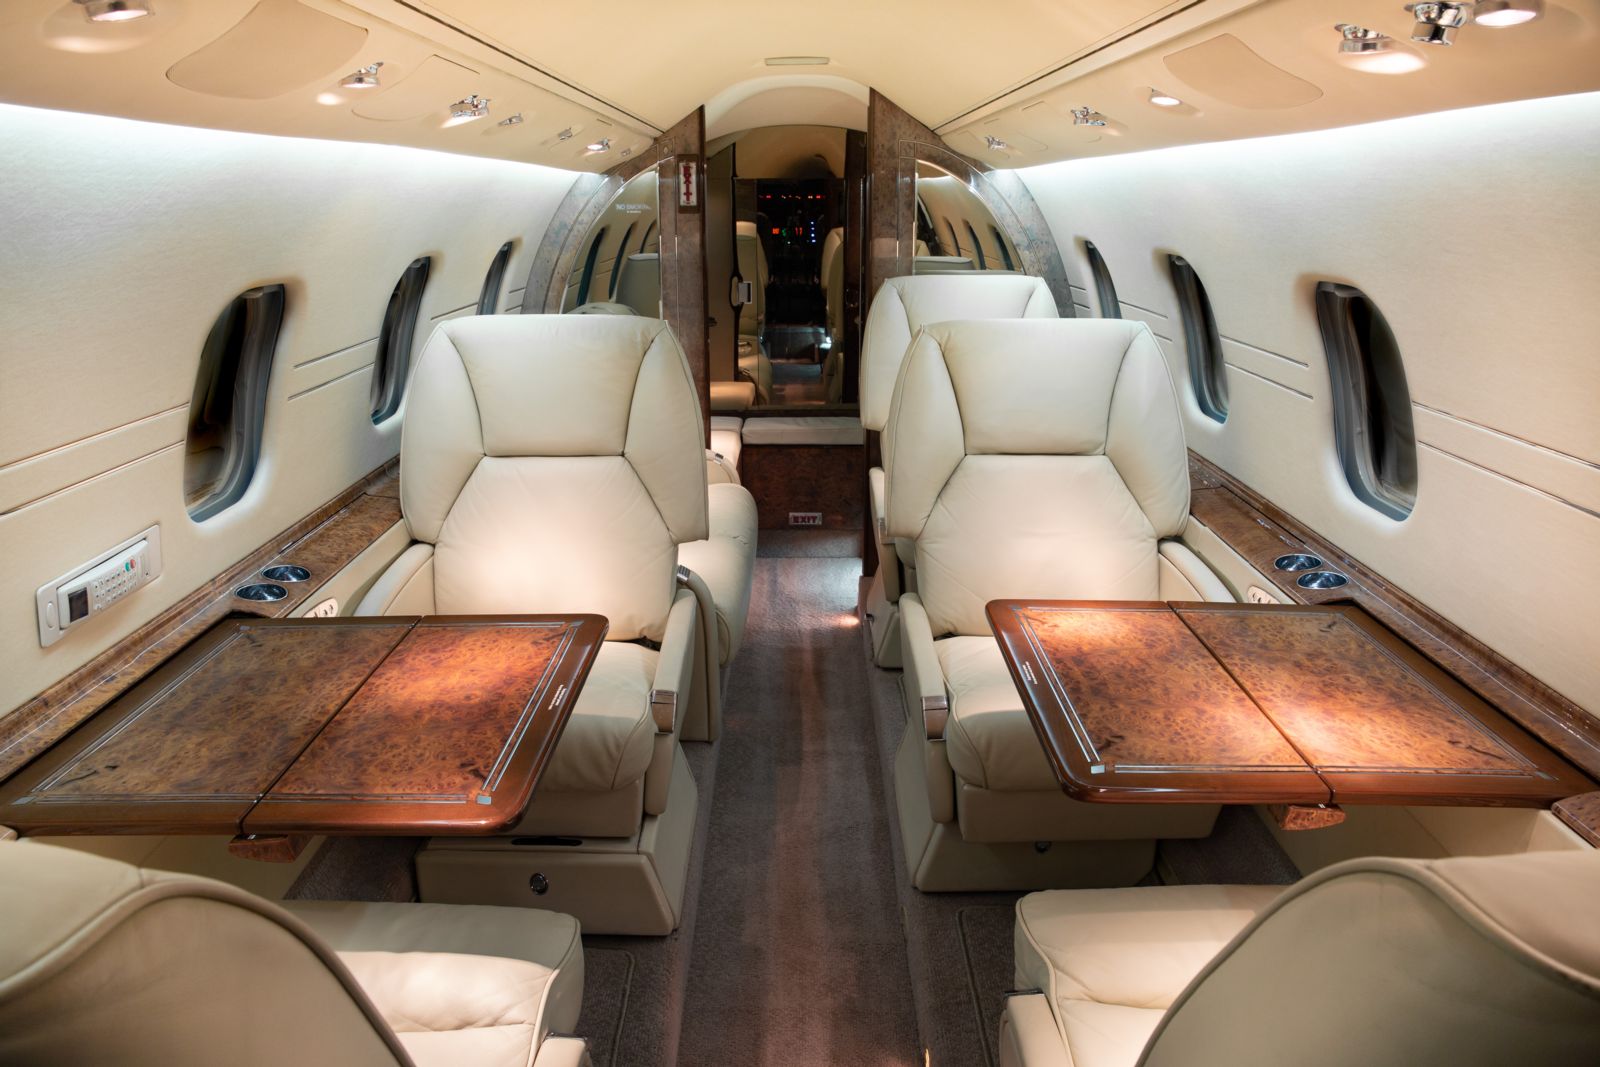 Bombardier Learjet 60  S/N 60-197 for sale | gallery image: /userfiles/images/Lear60_sn197/fwd%20aft%201.jpg